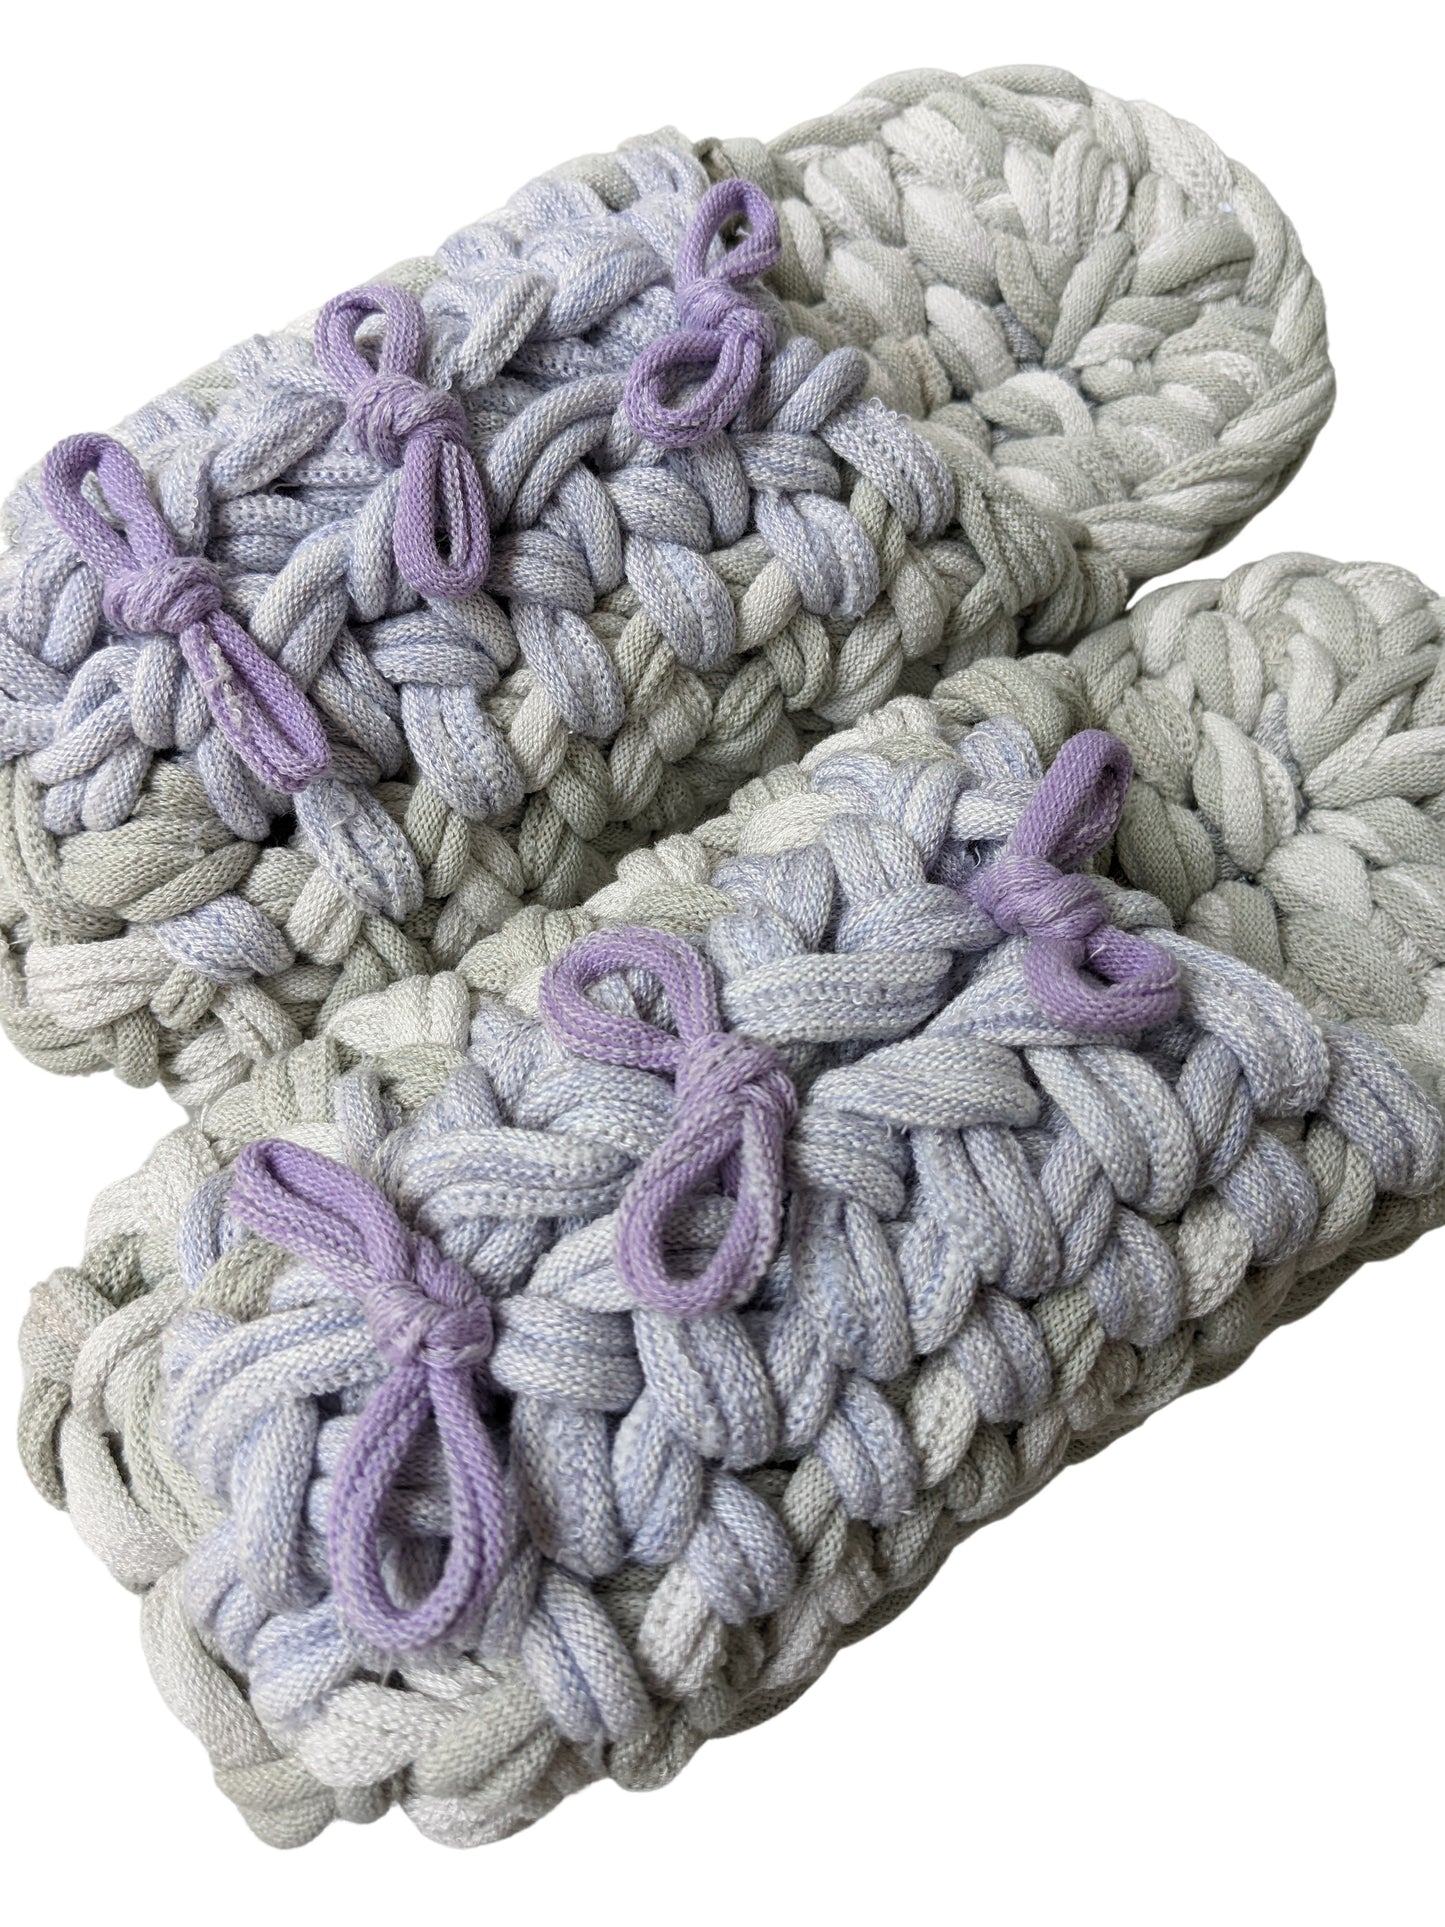 Large | Knit upcycle slippers 2022-L75 [Large]